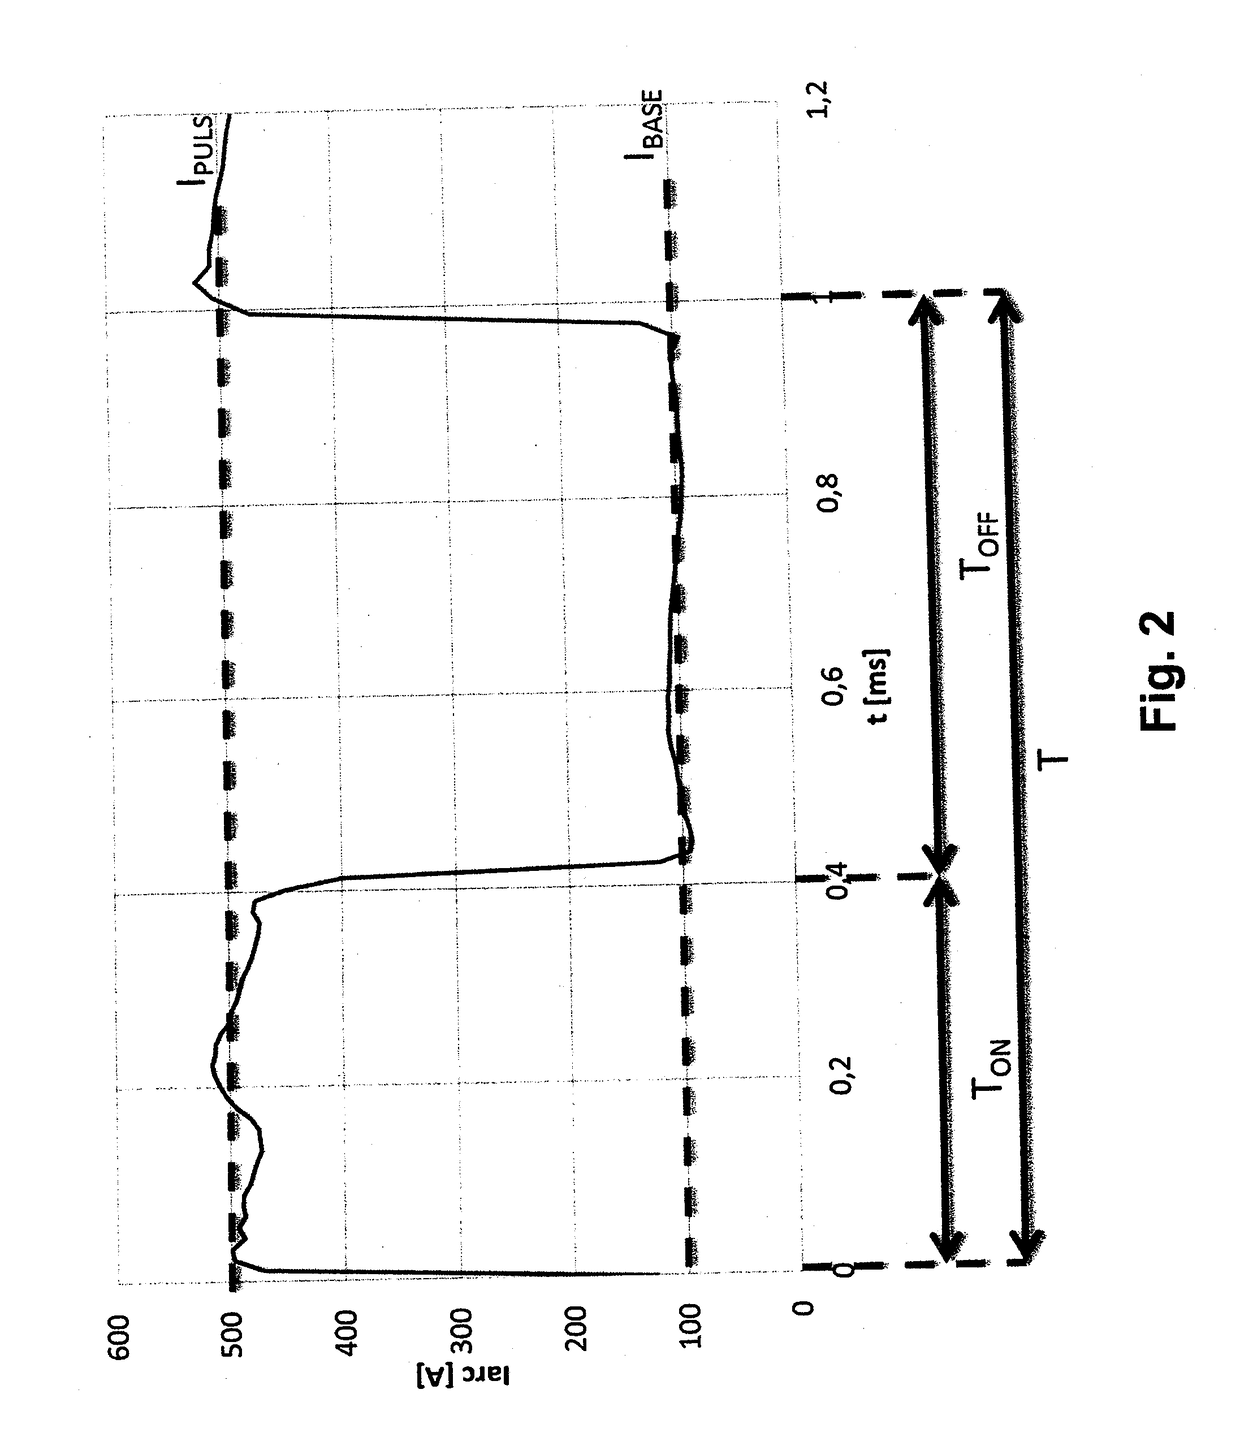 Method of Deposition of a Wear Resistant DLC Layer